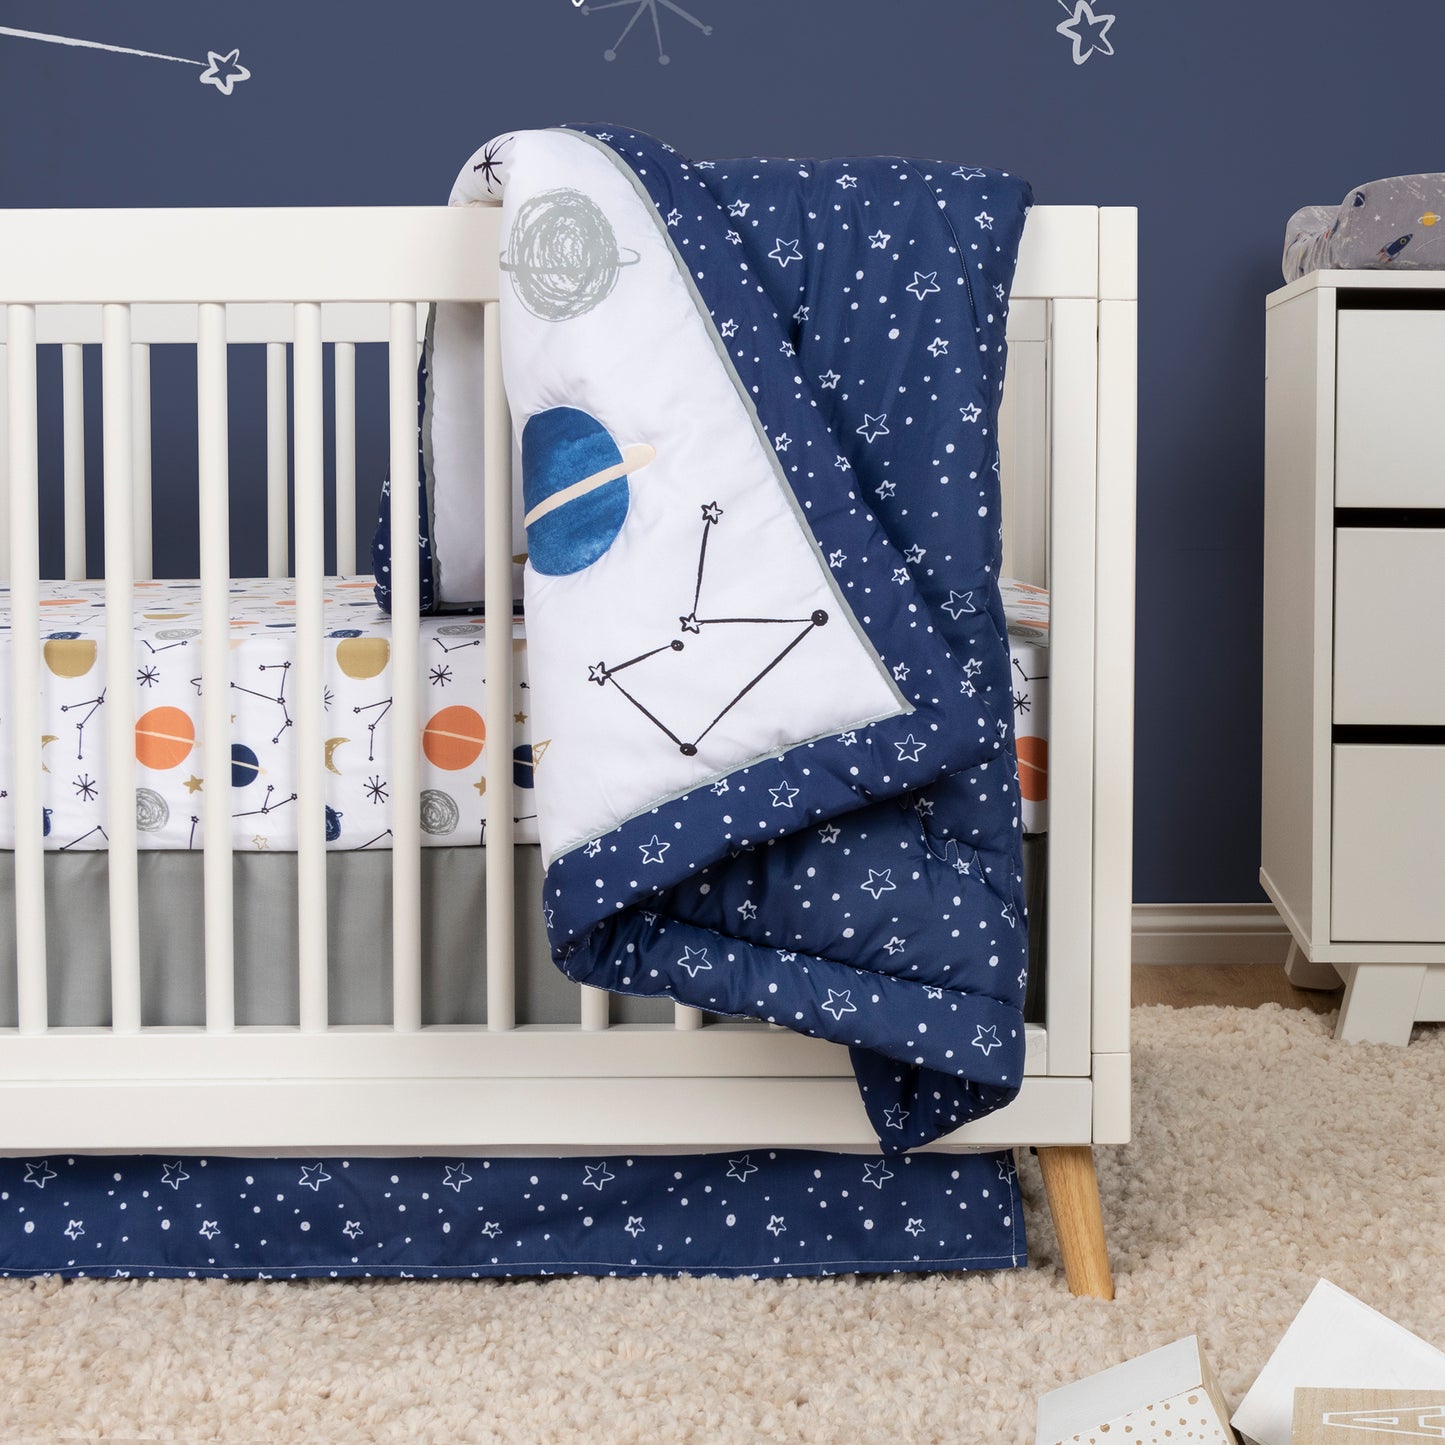 Cosmic Rocket 4 Piece Crib Bedding - stylized in room image on crib with rocket plush toy, crib quilt, crib sheet and crib skirt. All included in this space coordinating set